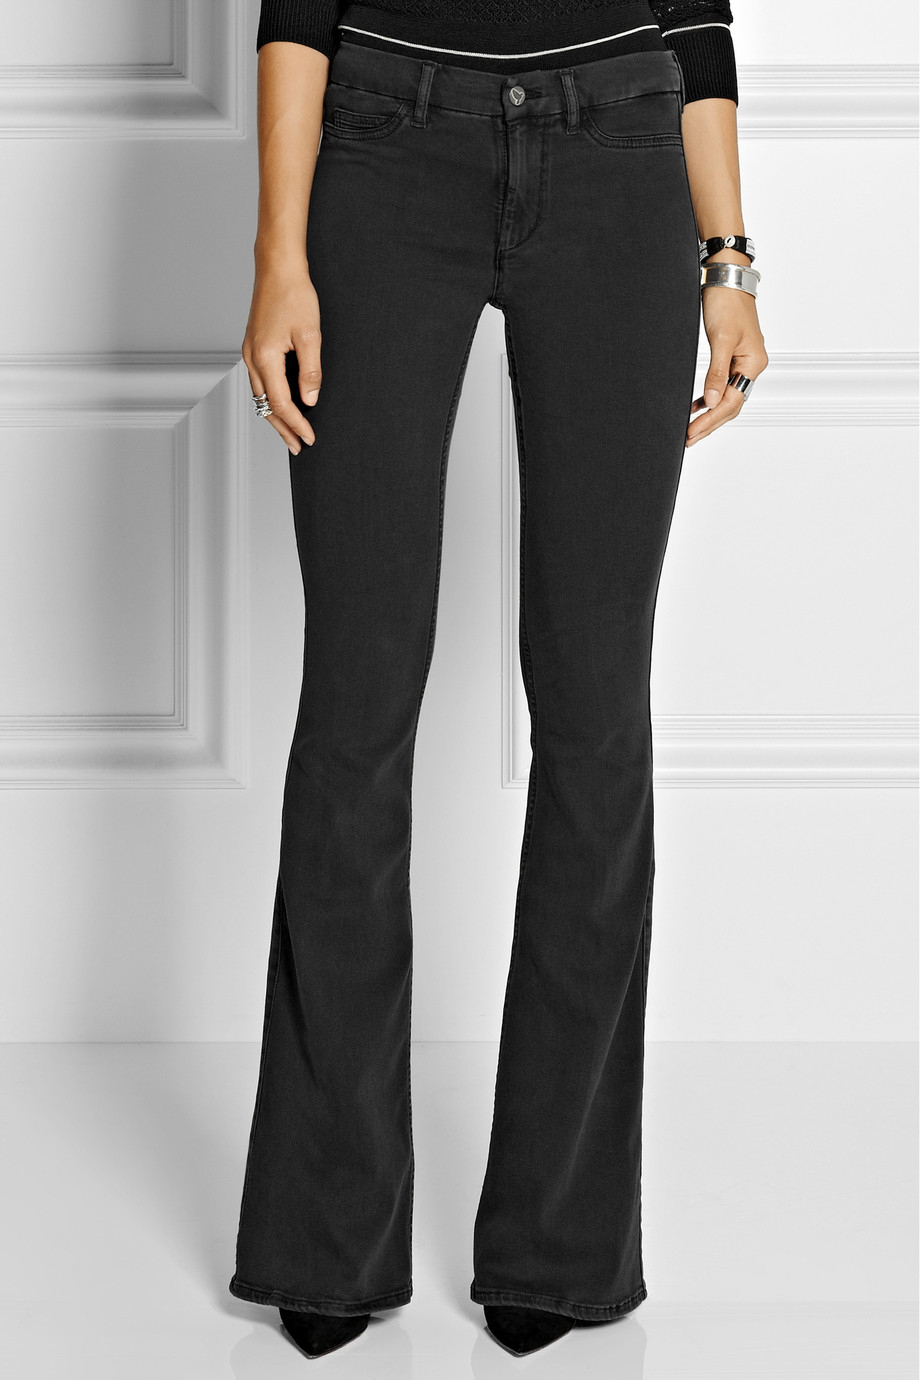 M.i.h Jeans The Skinny Marrakesh Mid-Rise Flared Jeans in Black - Lyst